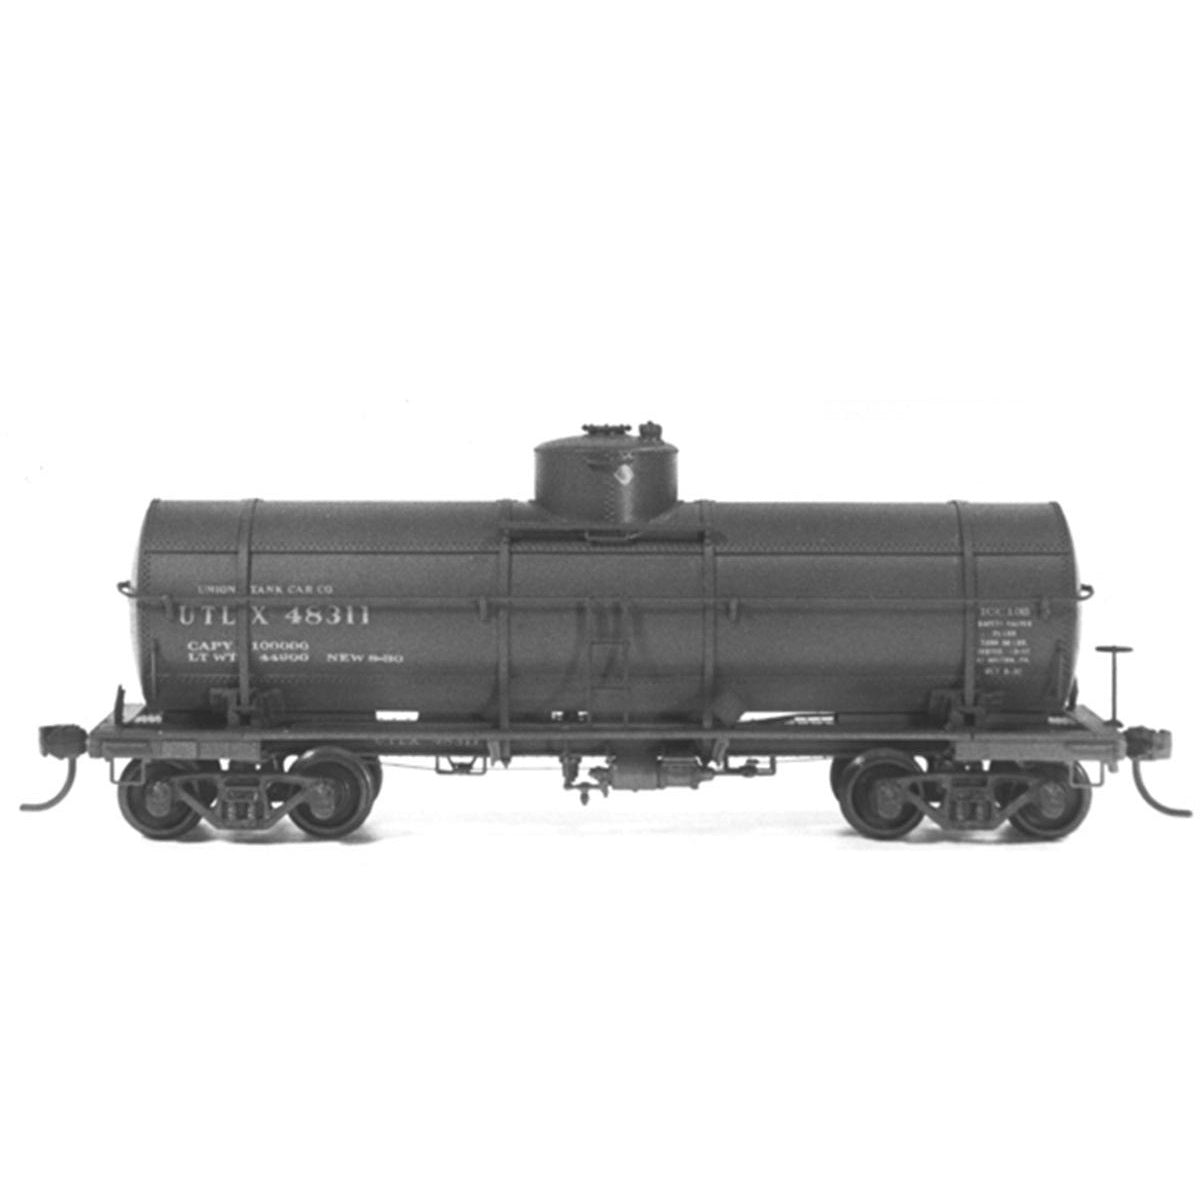 Tichy Train Group 60" Dome 10, 000 Gallon ICC Class 103 Tank Cars - Undecorated, HO Scale 6 Pack - Micro - Mark Model Trains, Rolling Stock, Z